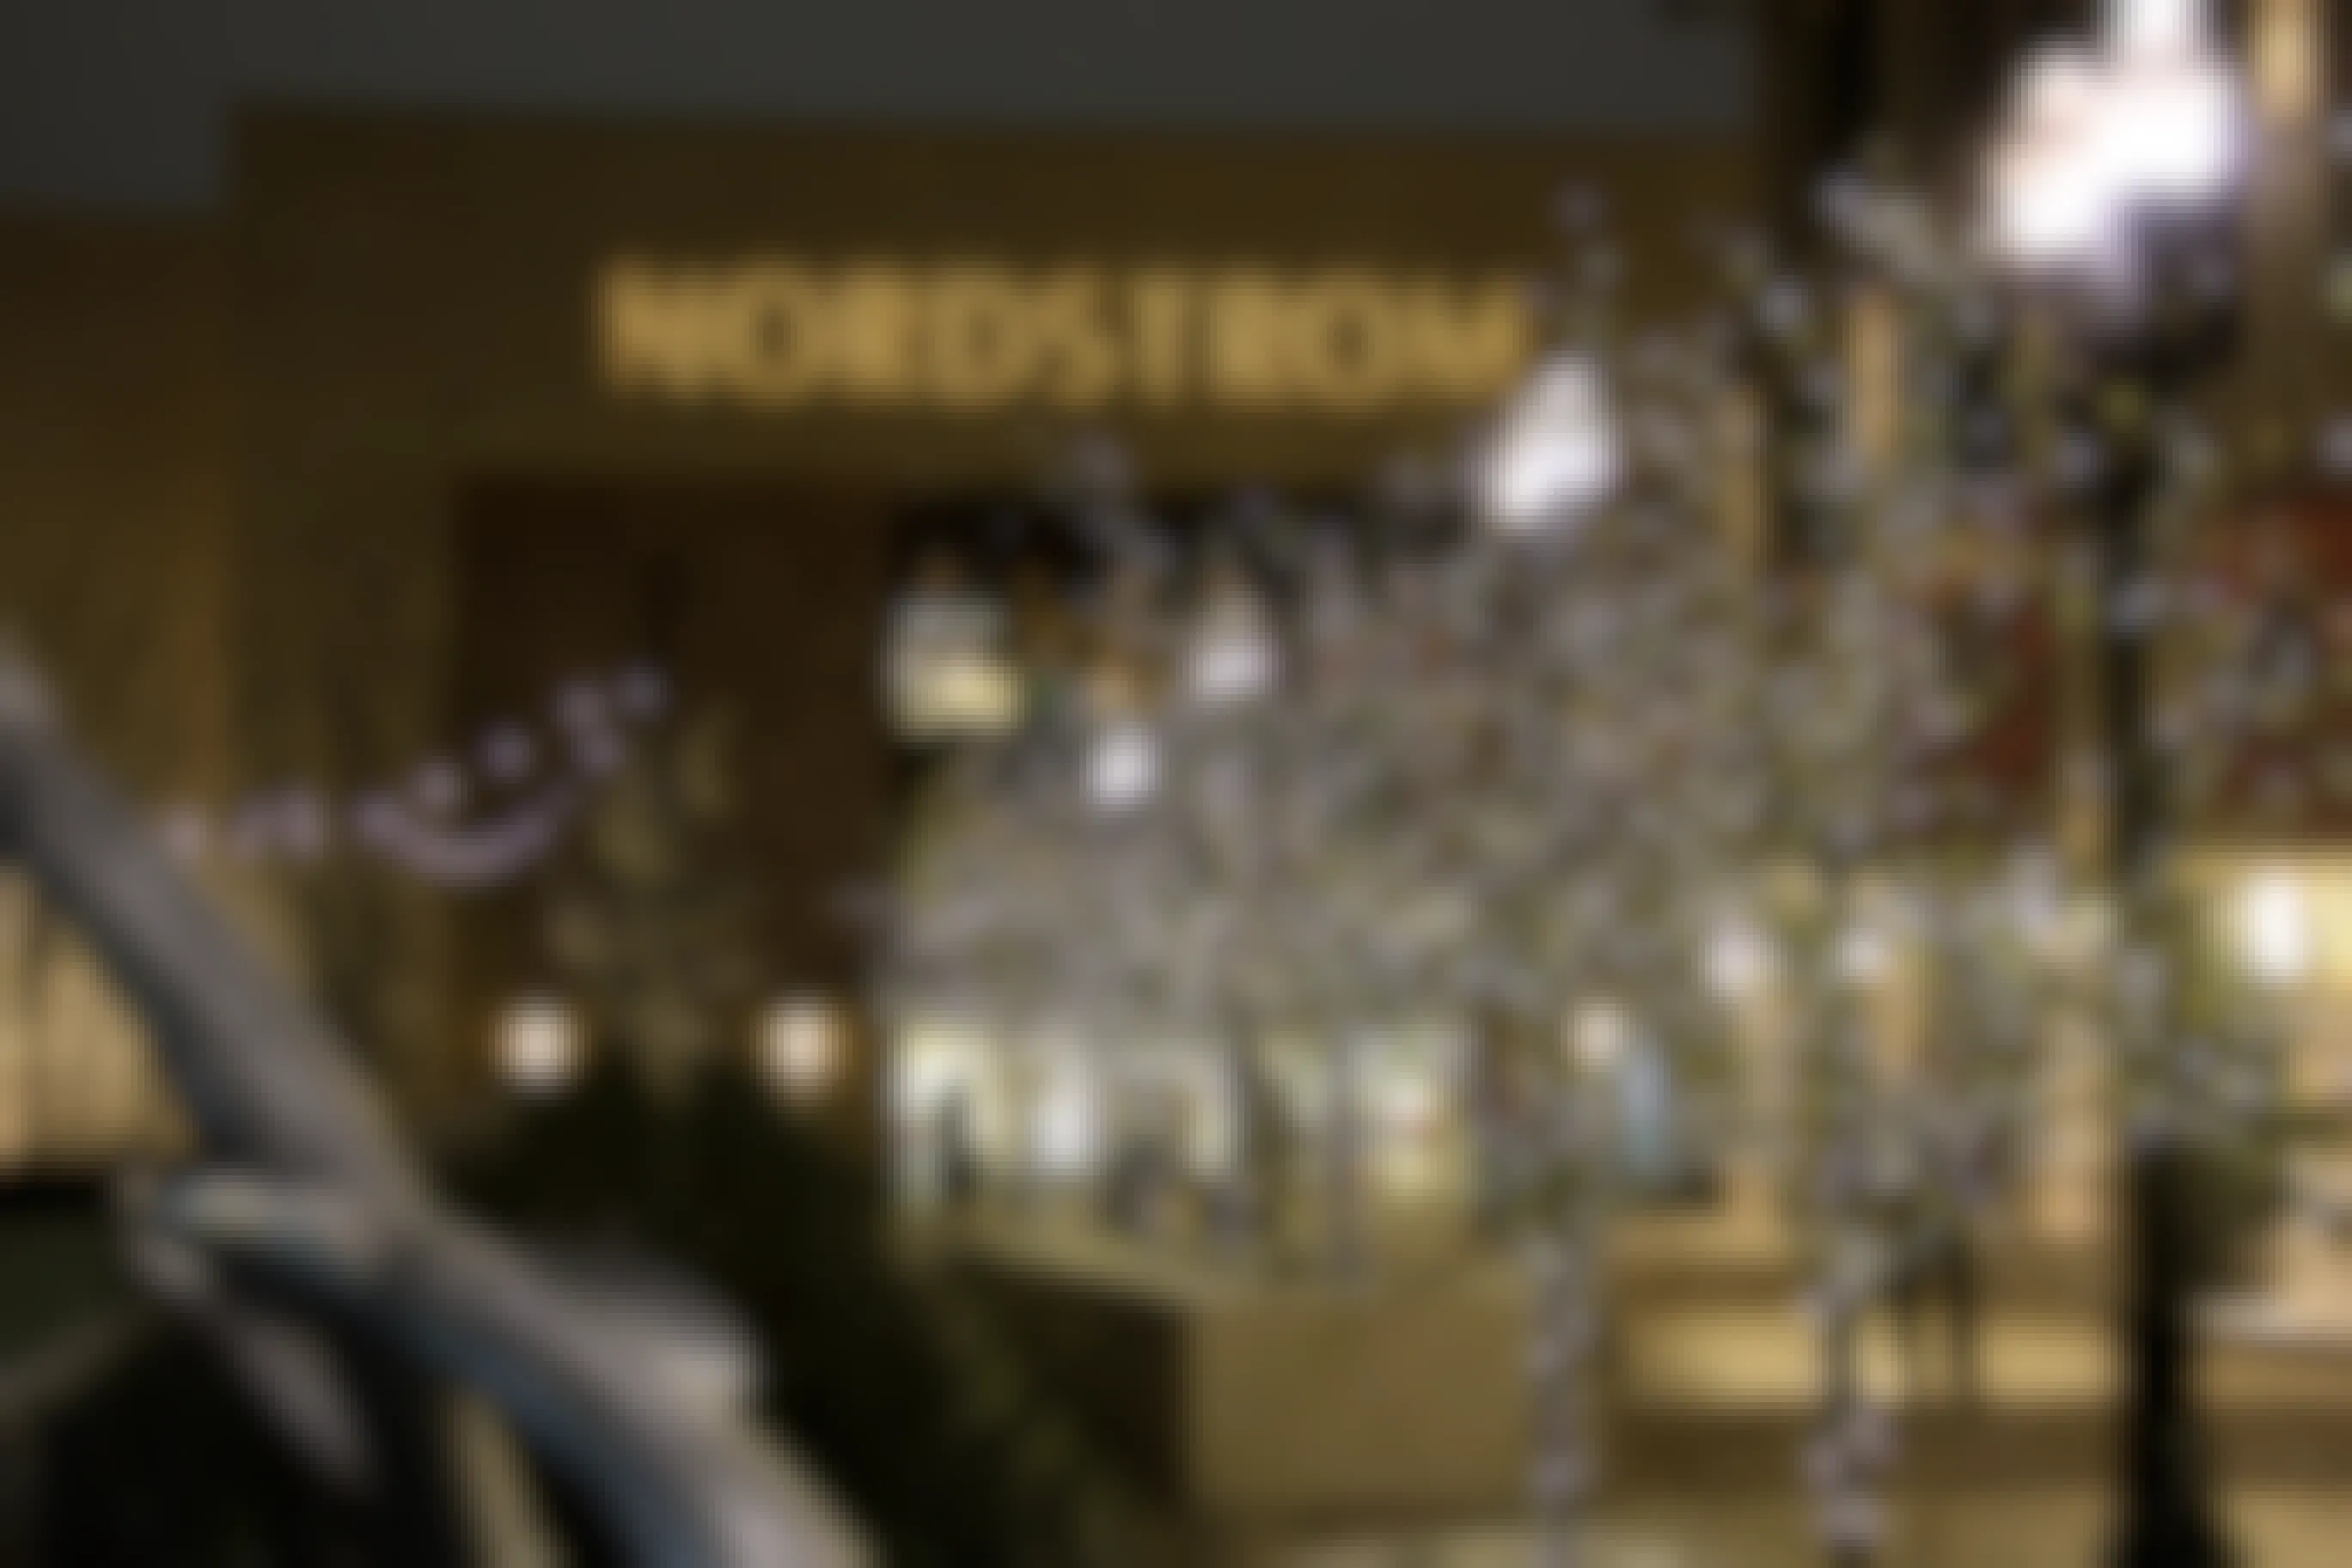 Trees decorated for Christmas outside of a Nordstrom department store